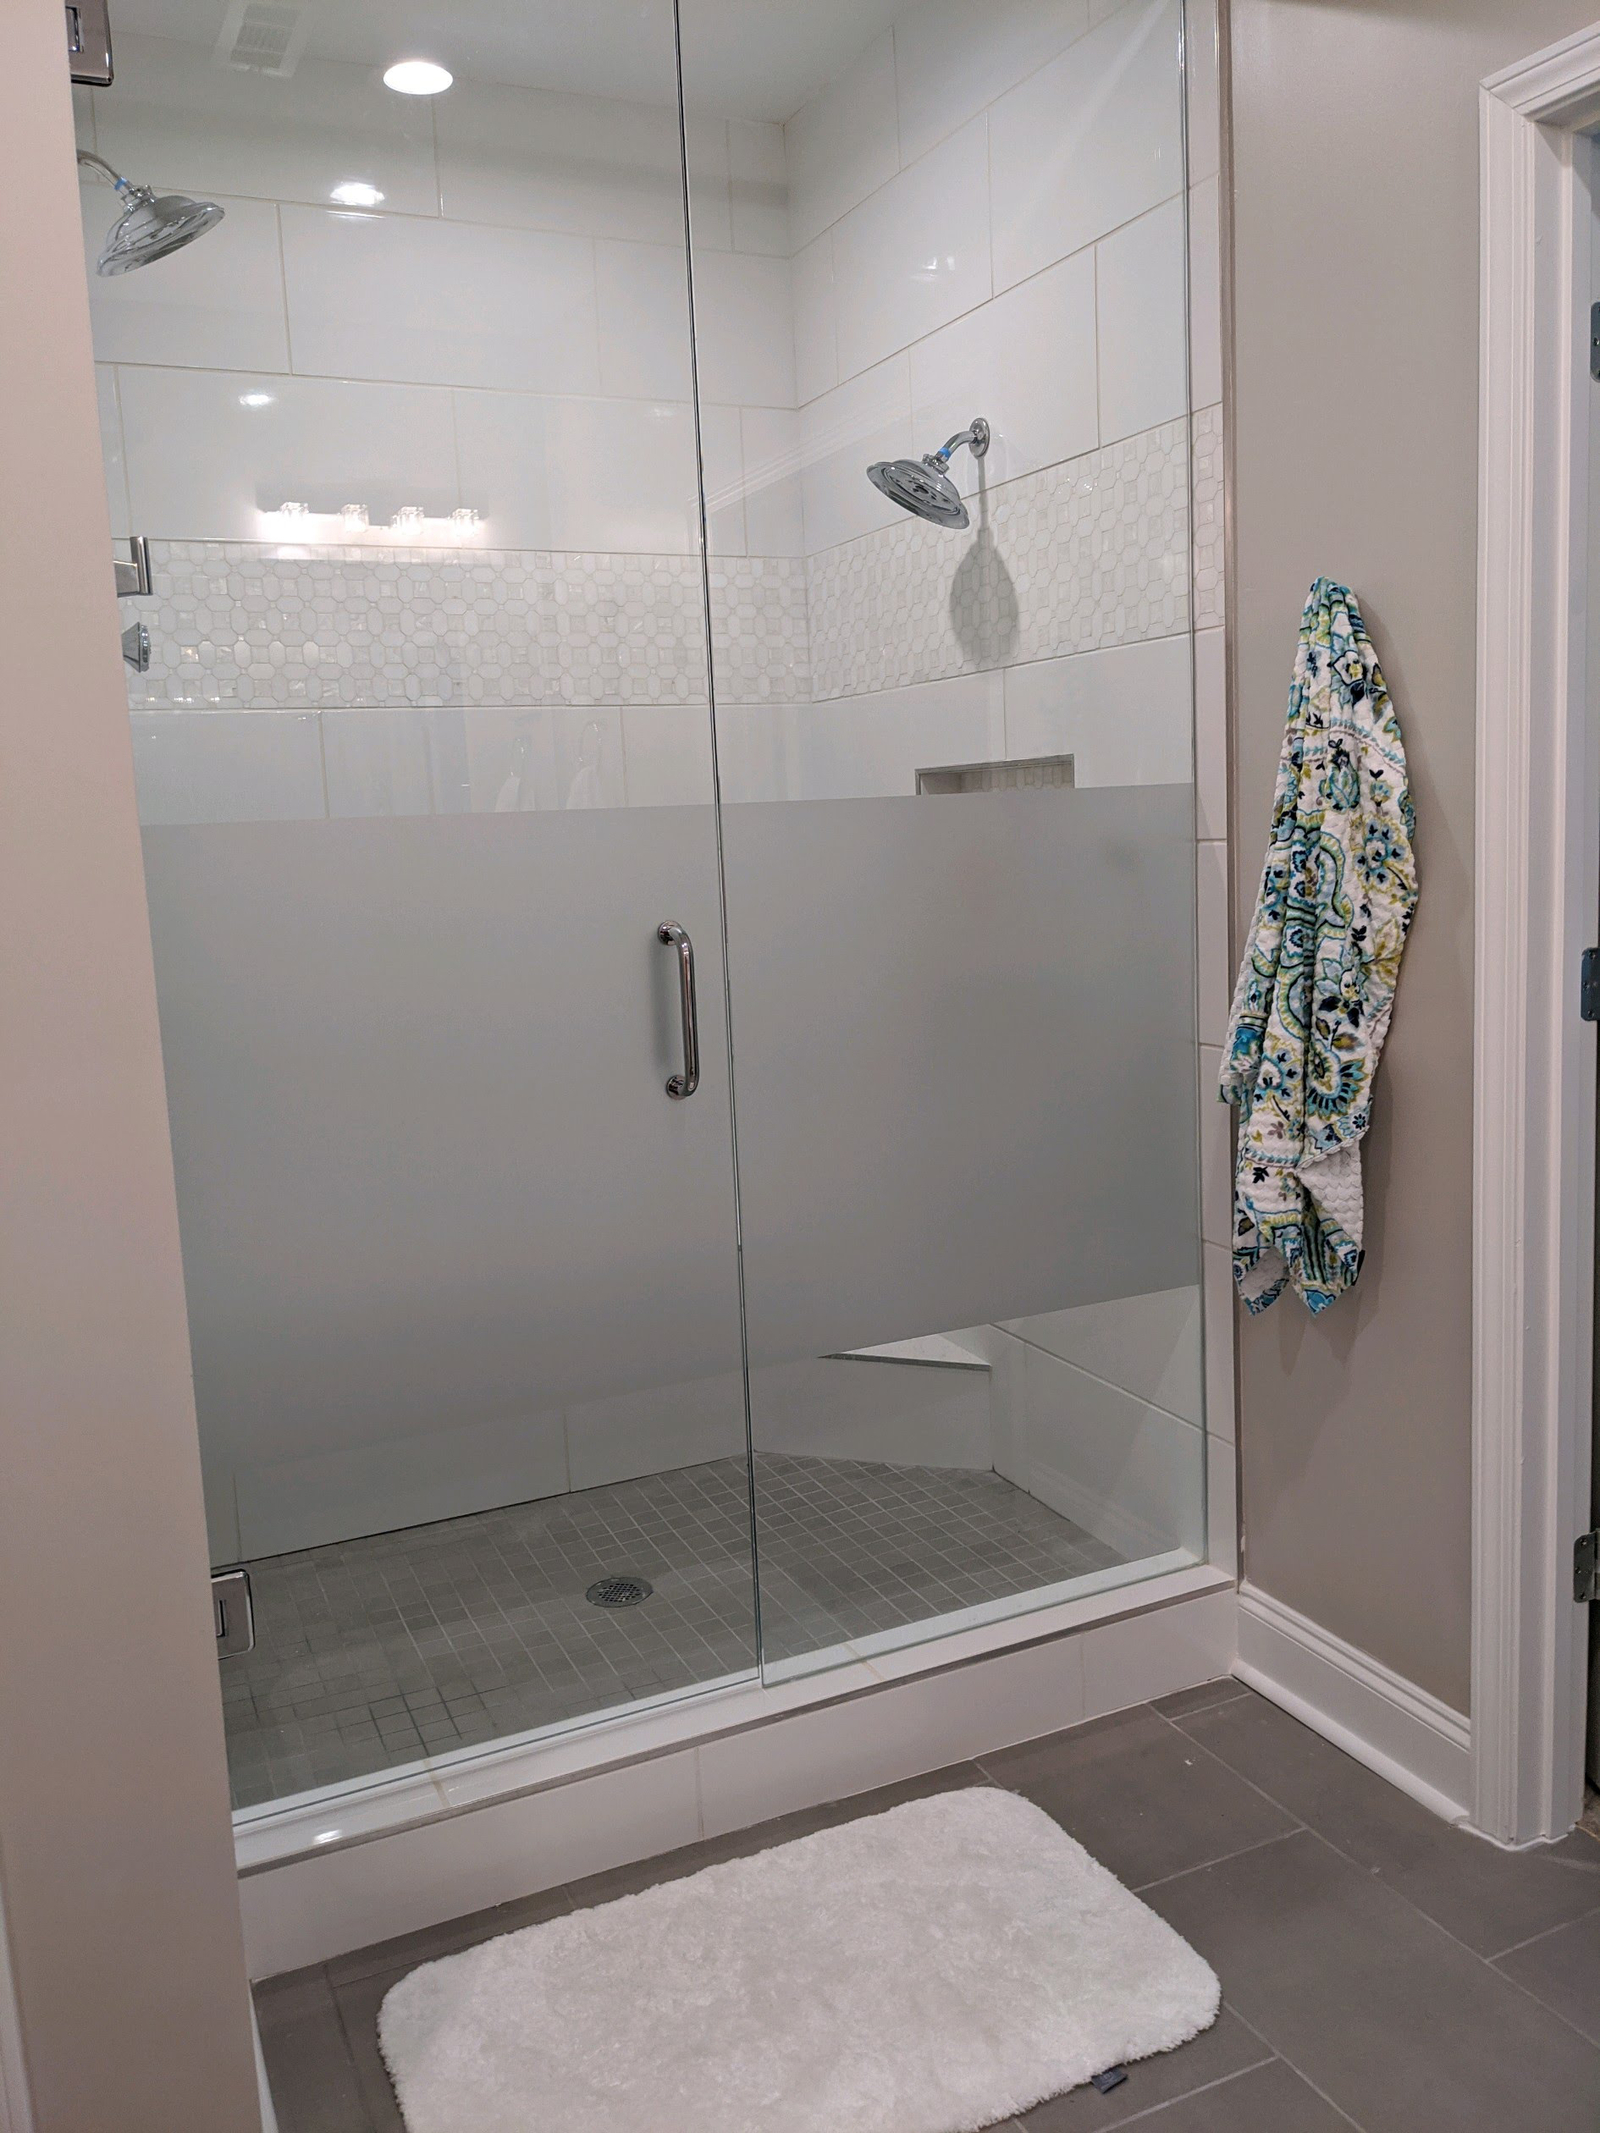 Privacy band on shower glass to provide privacy and maintain openness of the bathroom.